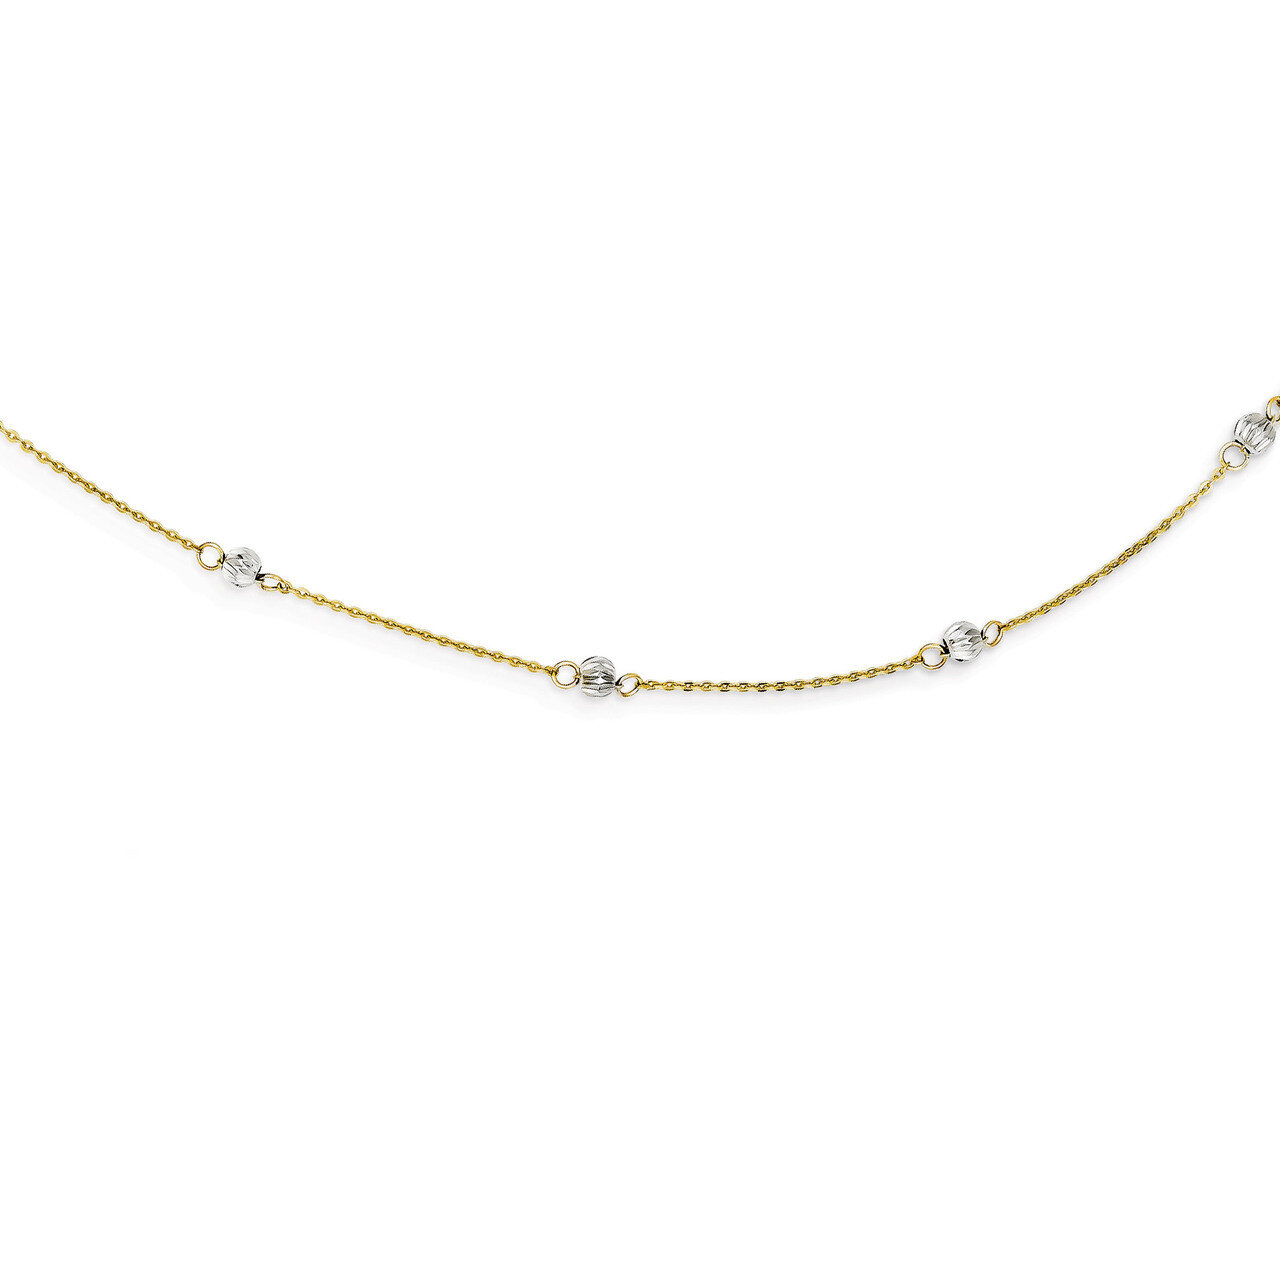 Diamond-cut Beads with 2in Ext Necklace 16 Inch 14k Two-Tone Gold SF2003-16